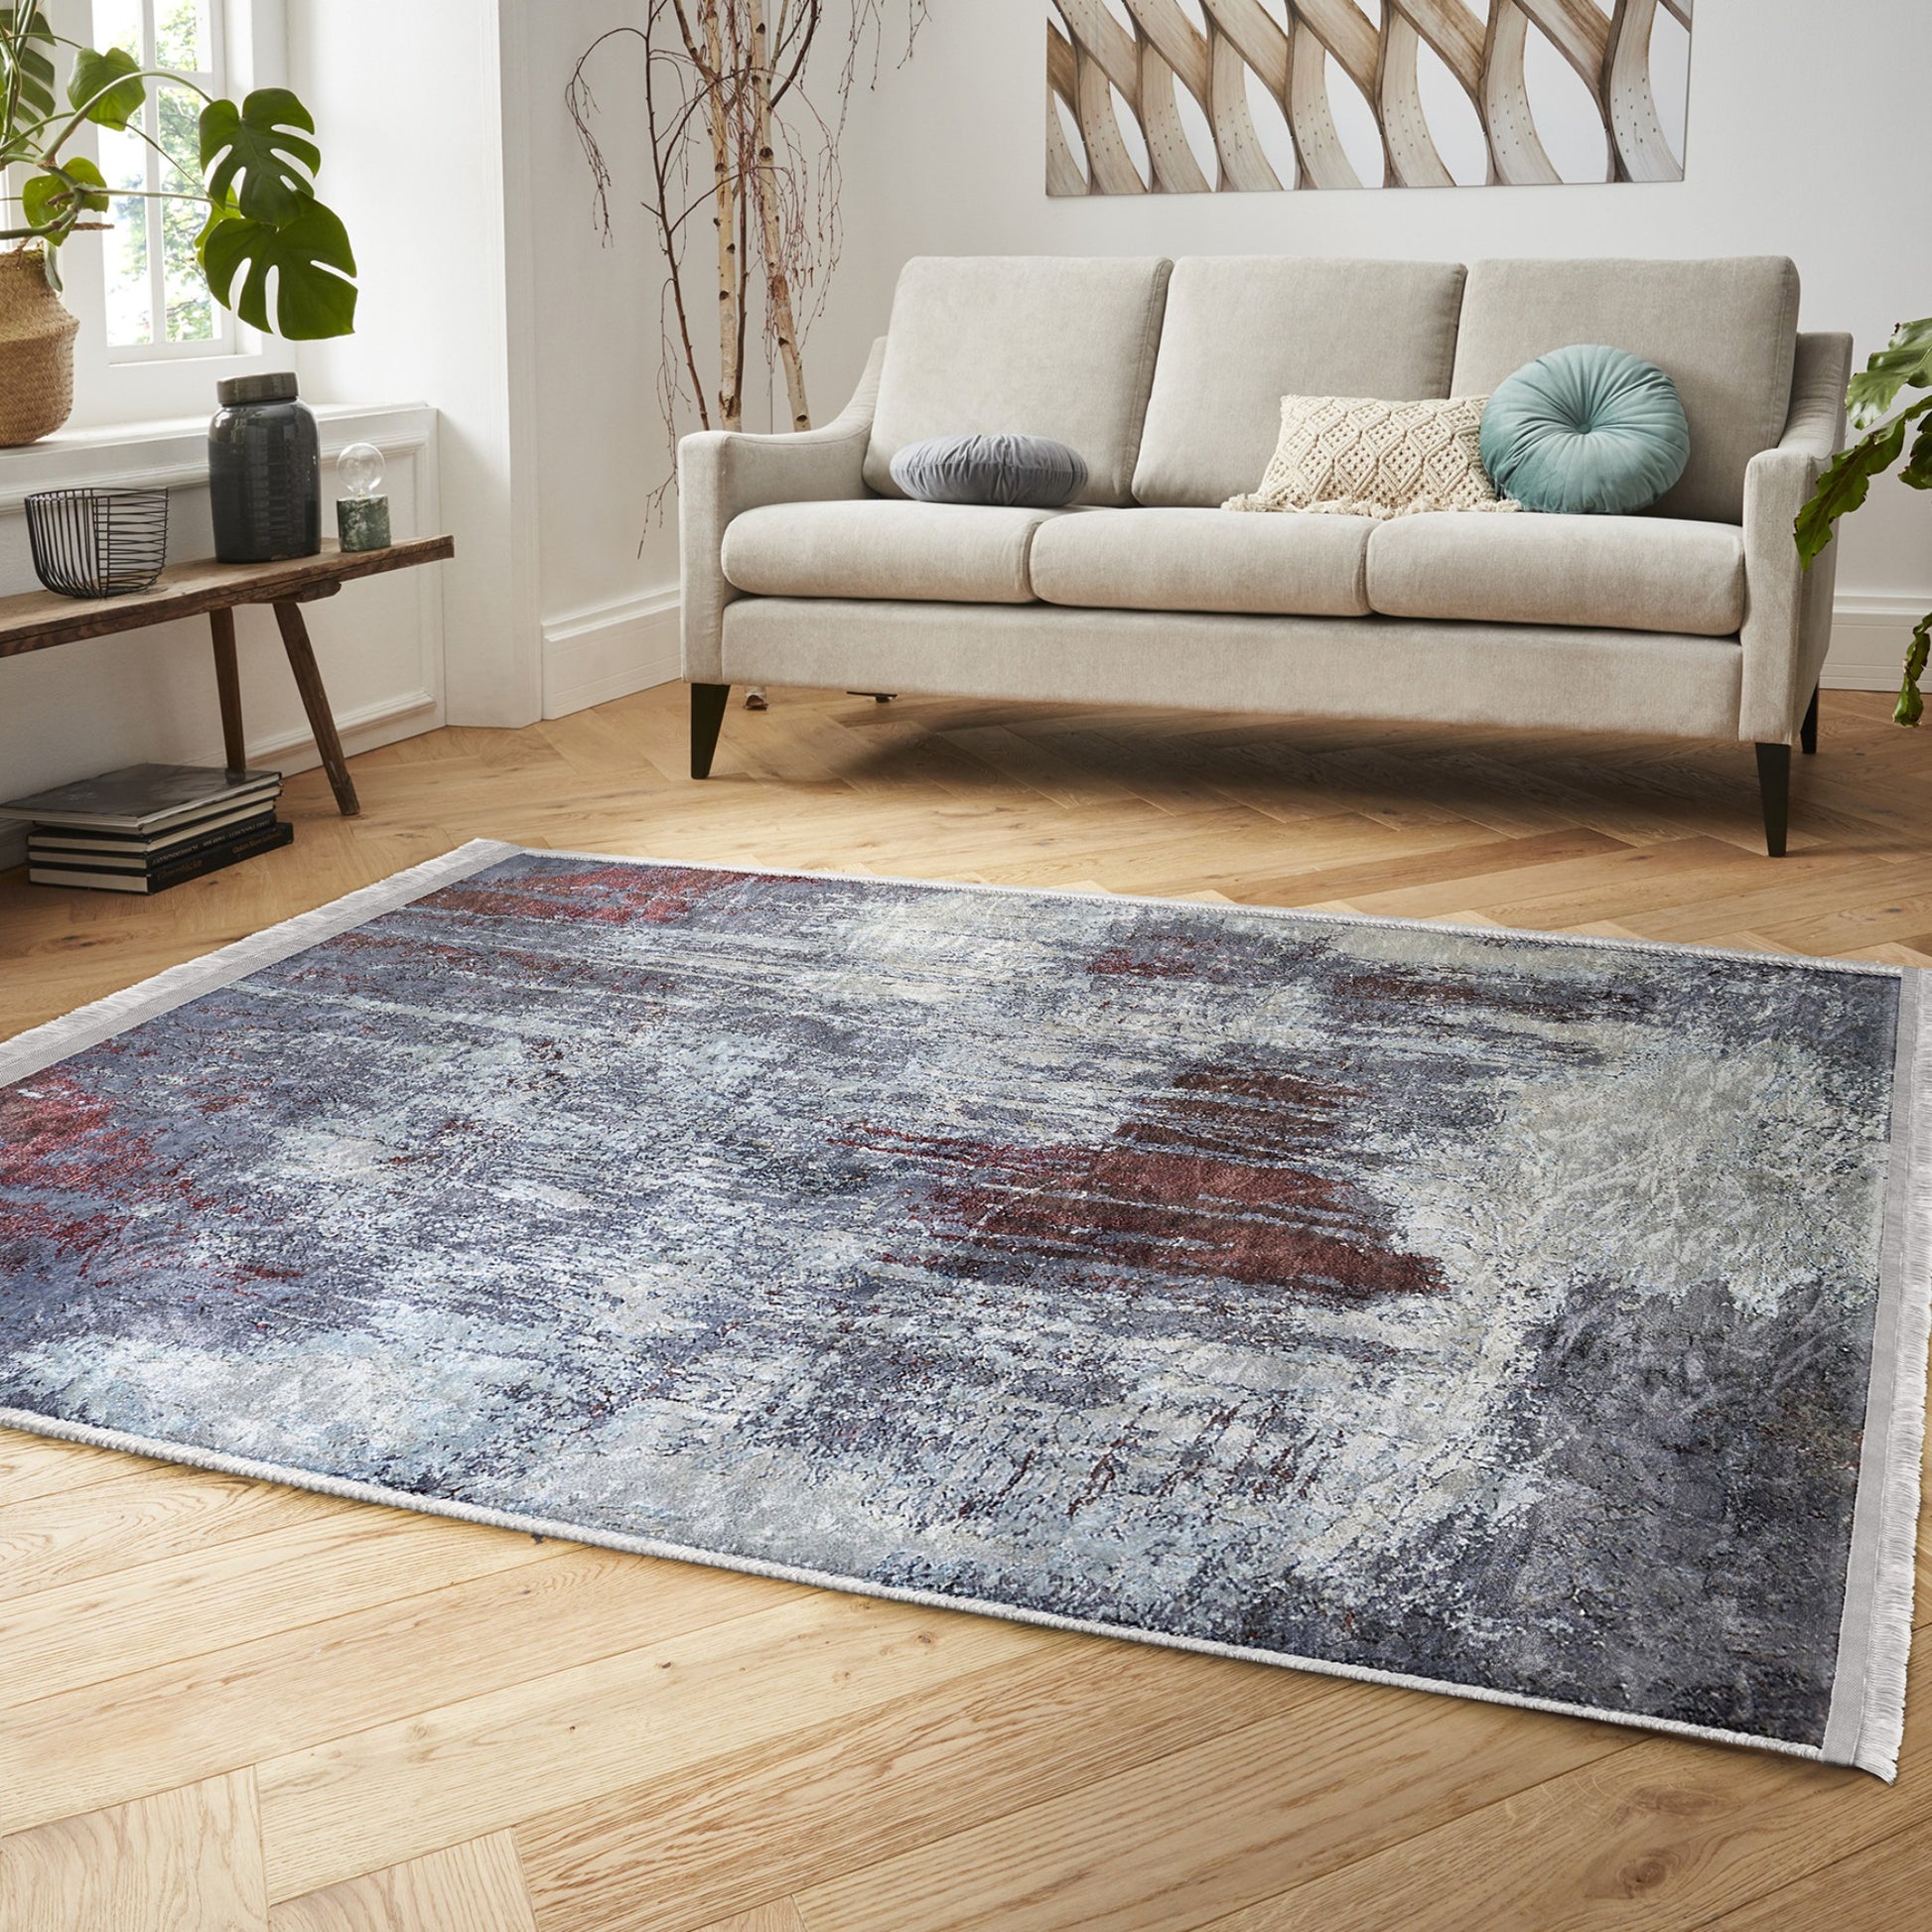 Stylish Rug with Decorative Rustic Pattern